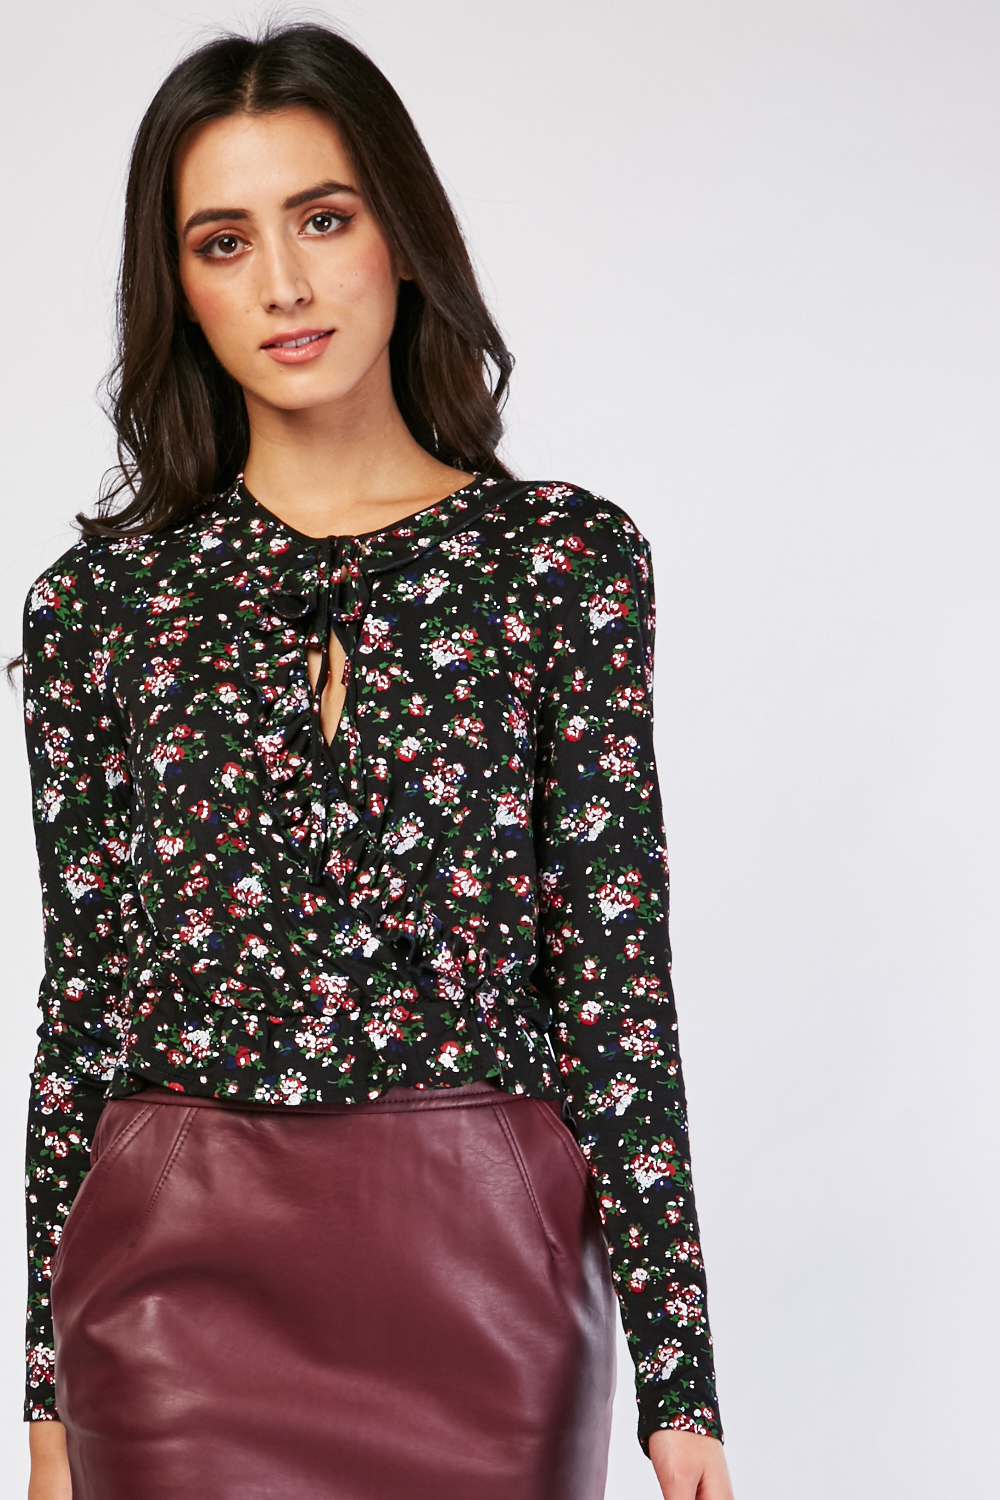 Ruffle Floral Print Wrap Top - Just $3